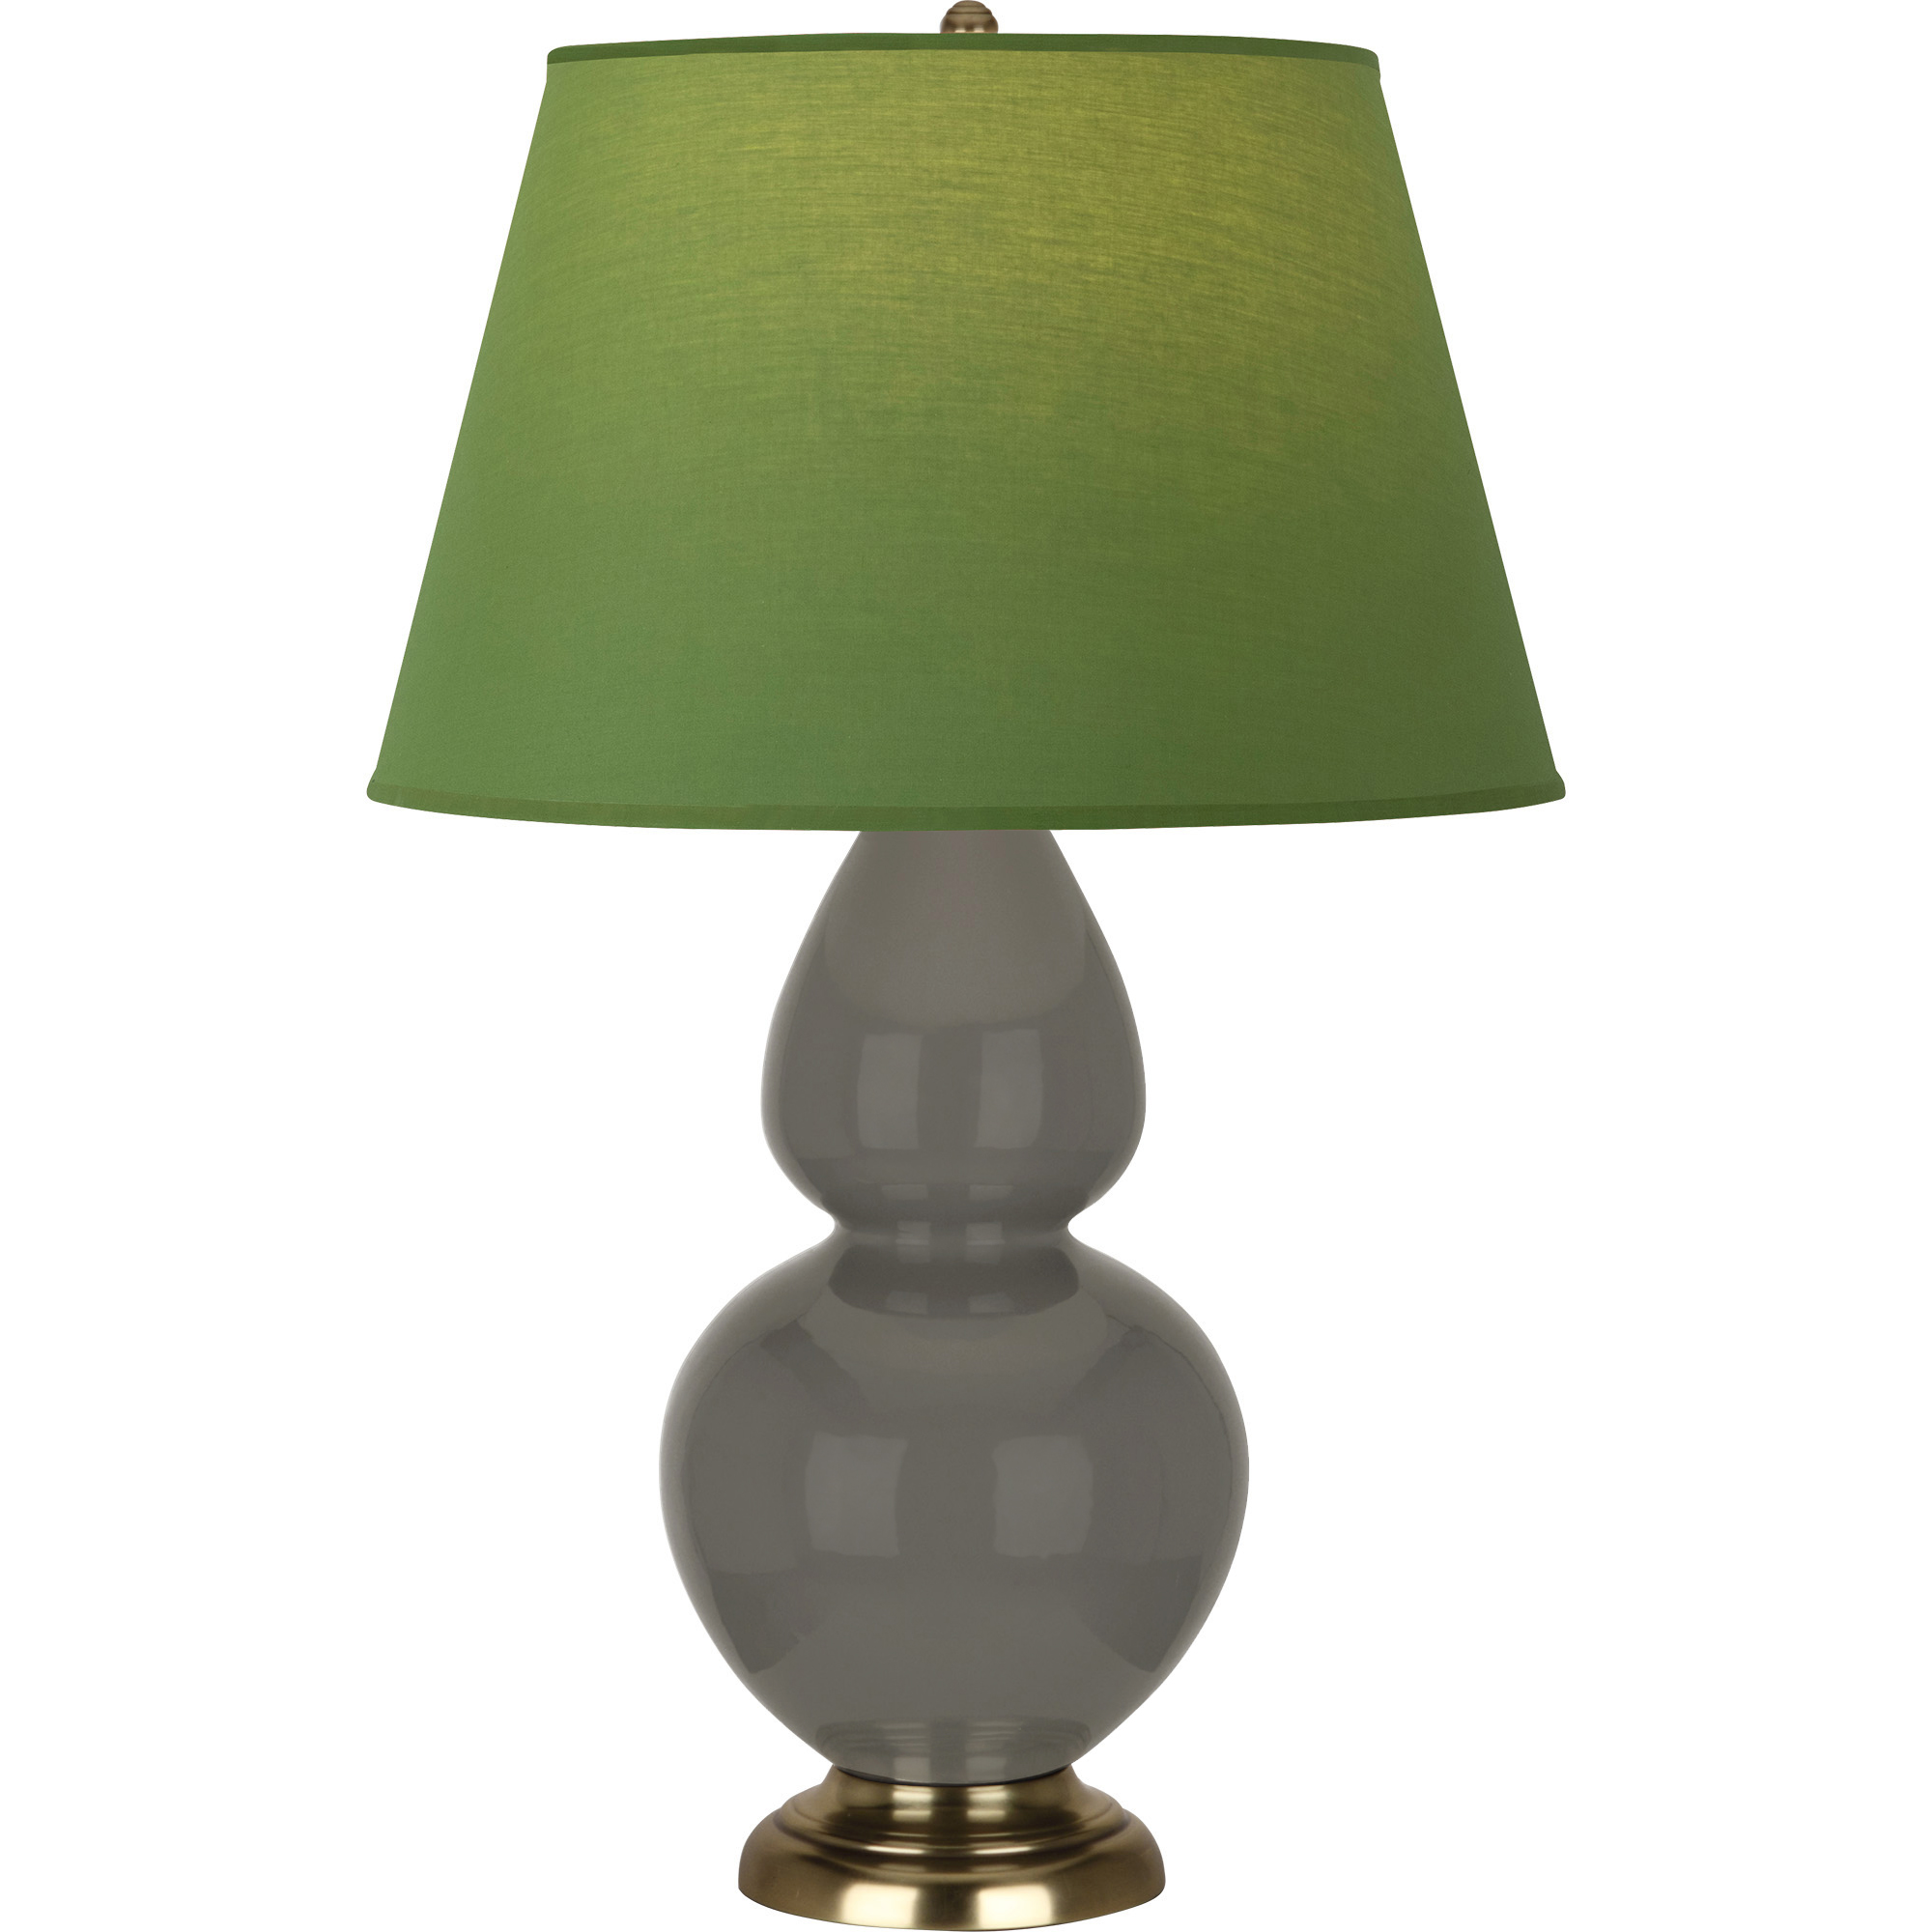 Double Gourd Table Lamp Style #CR20G